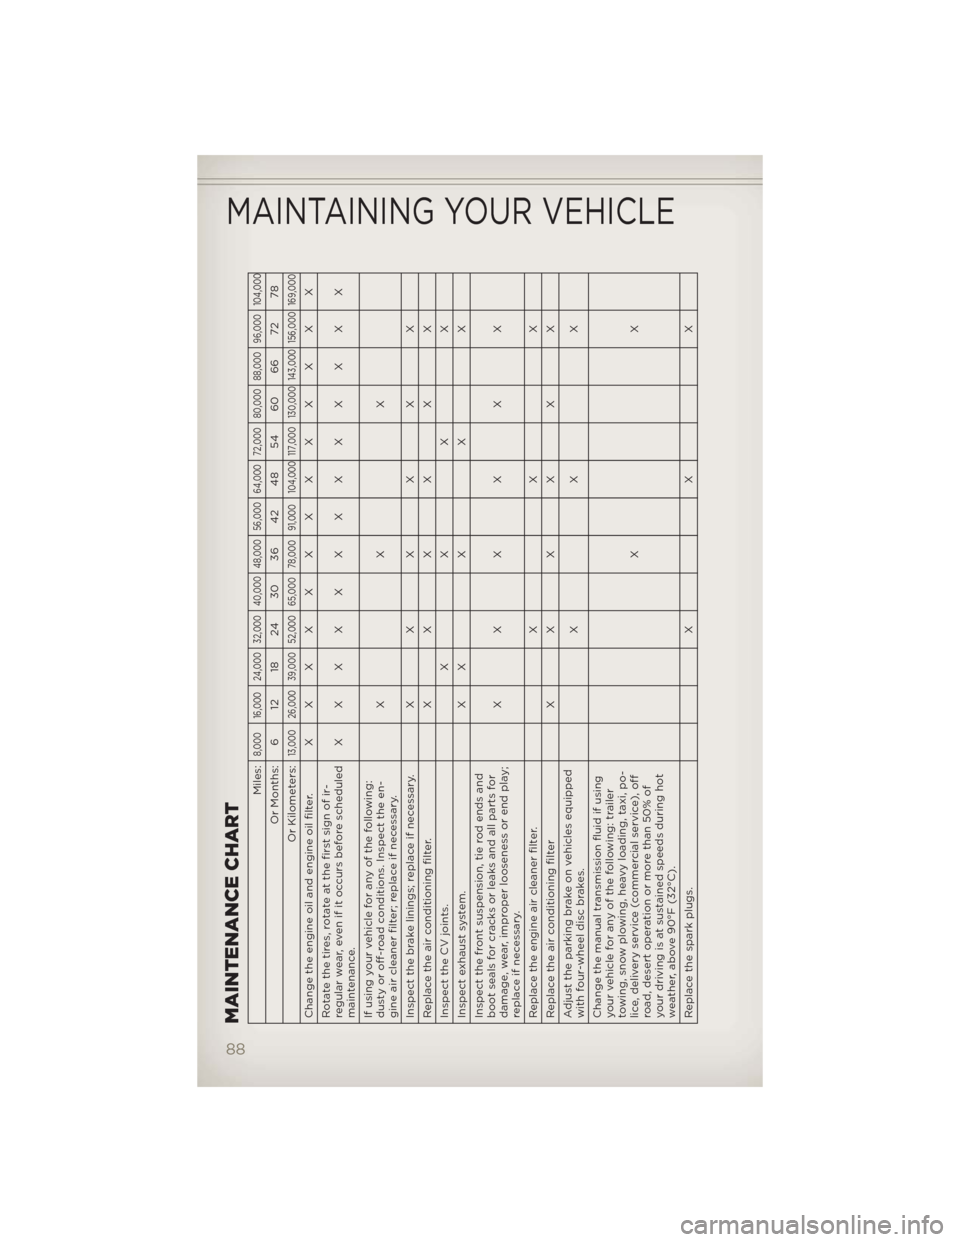 JEEP PATRIOT 2012 1.G Manual Online MAINTENANCE CHART
Miles:
8,000 16,000 24,000 32,000 40,000 48,000 56,000 64,000 72,000 80,000 88,000 96,000 104,000
Or Months: 6 12 18 24 30 36 42 48 54 60 66 72 78
Or Kilometers:
13,000 26,000 39,000